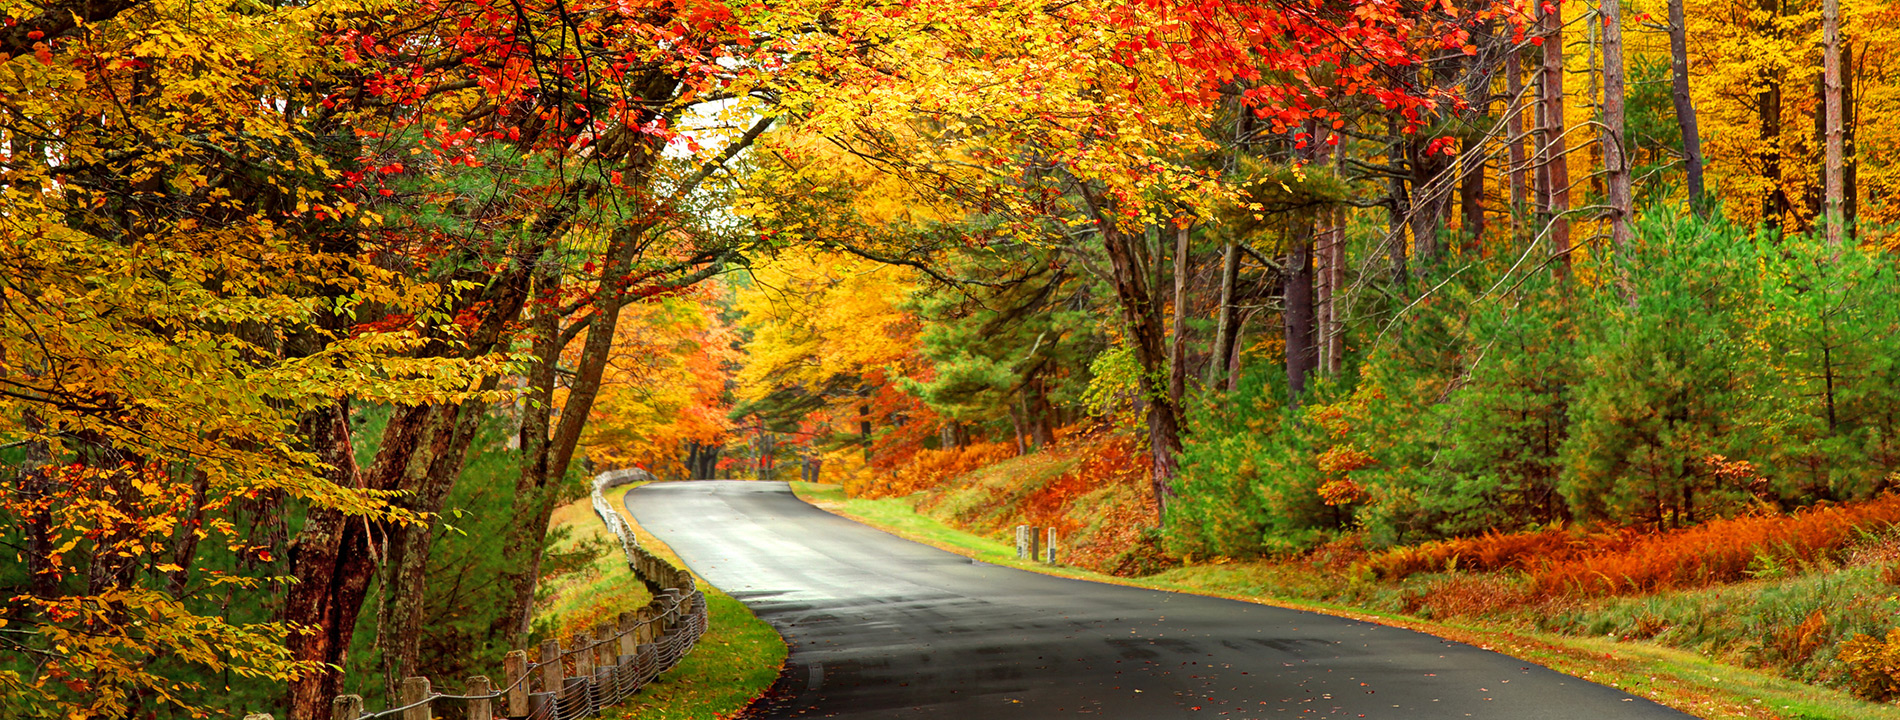 A road and trees in the fall.